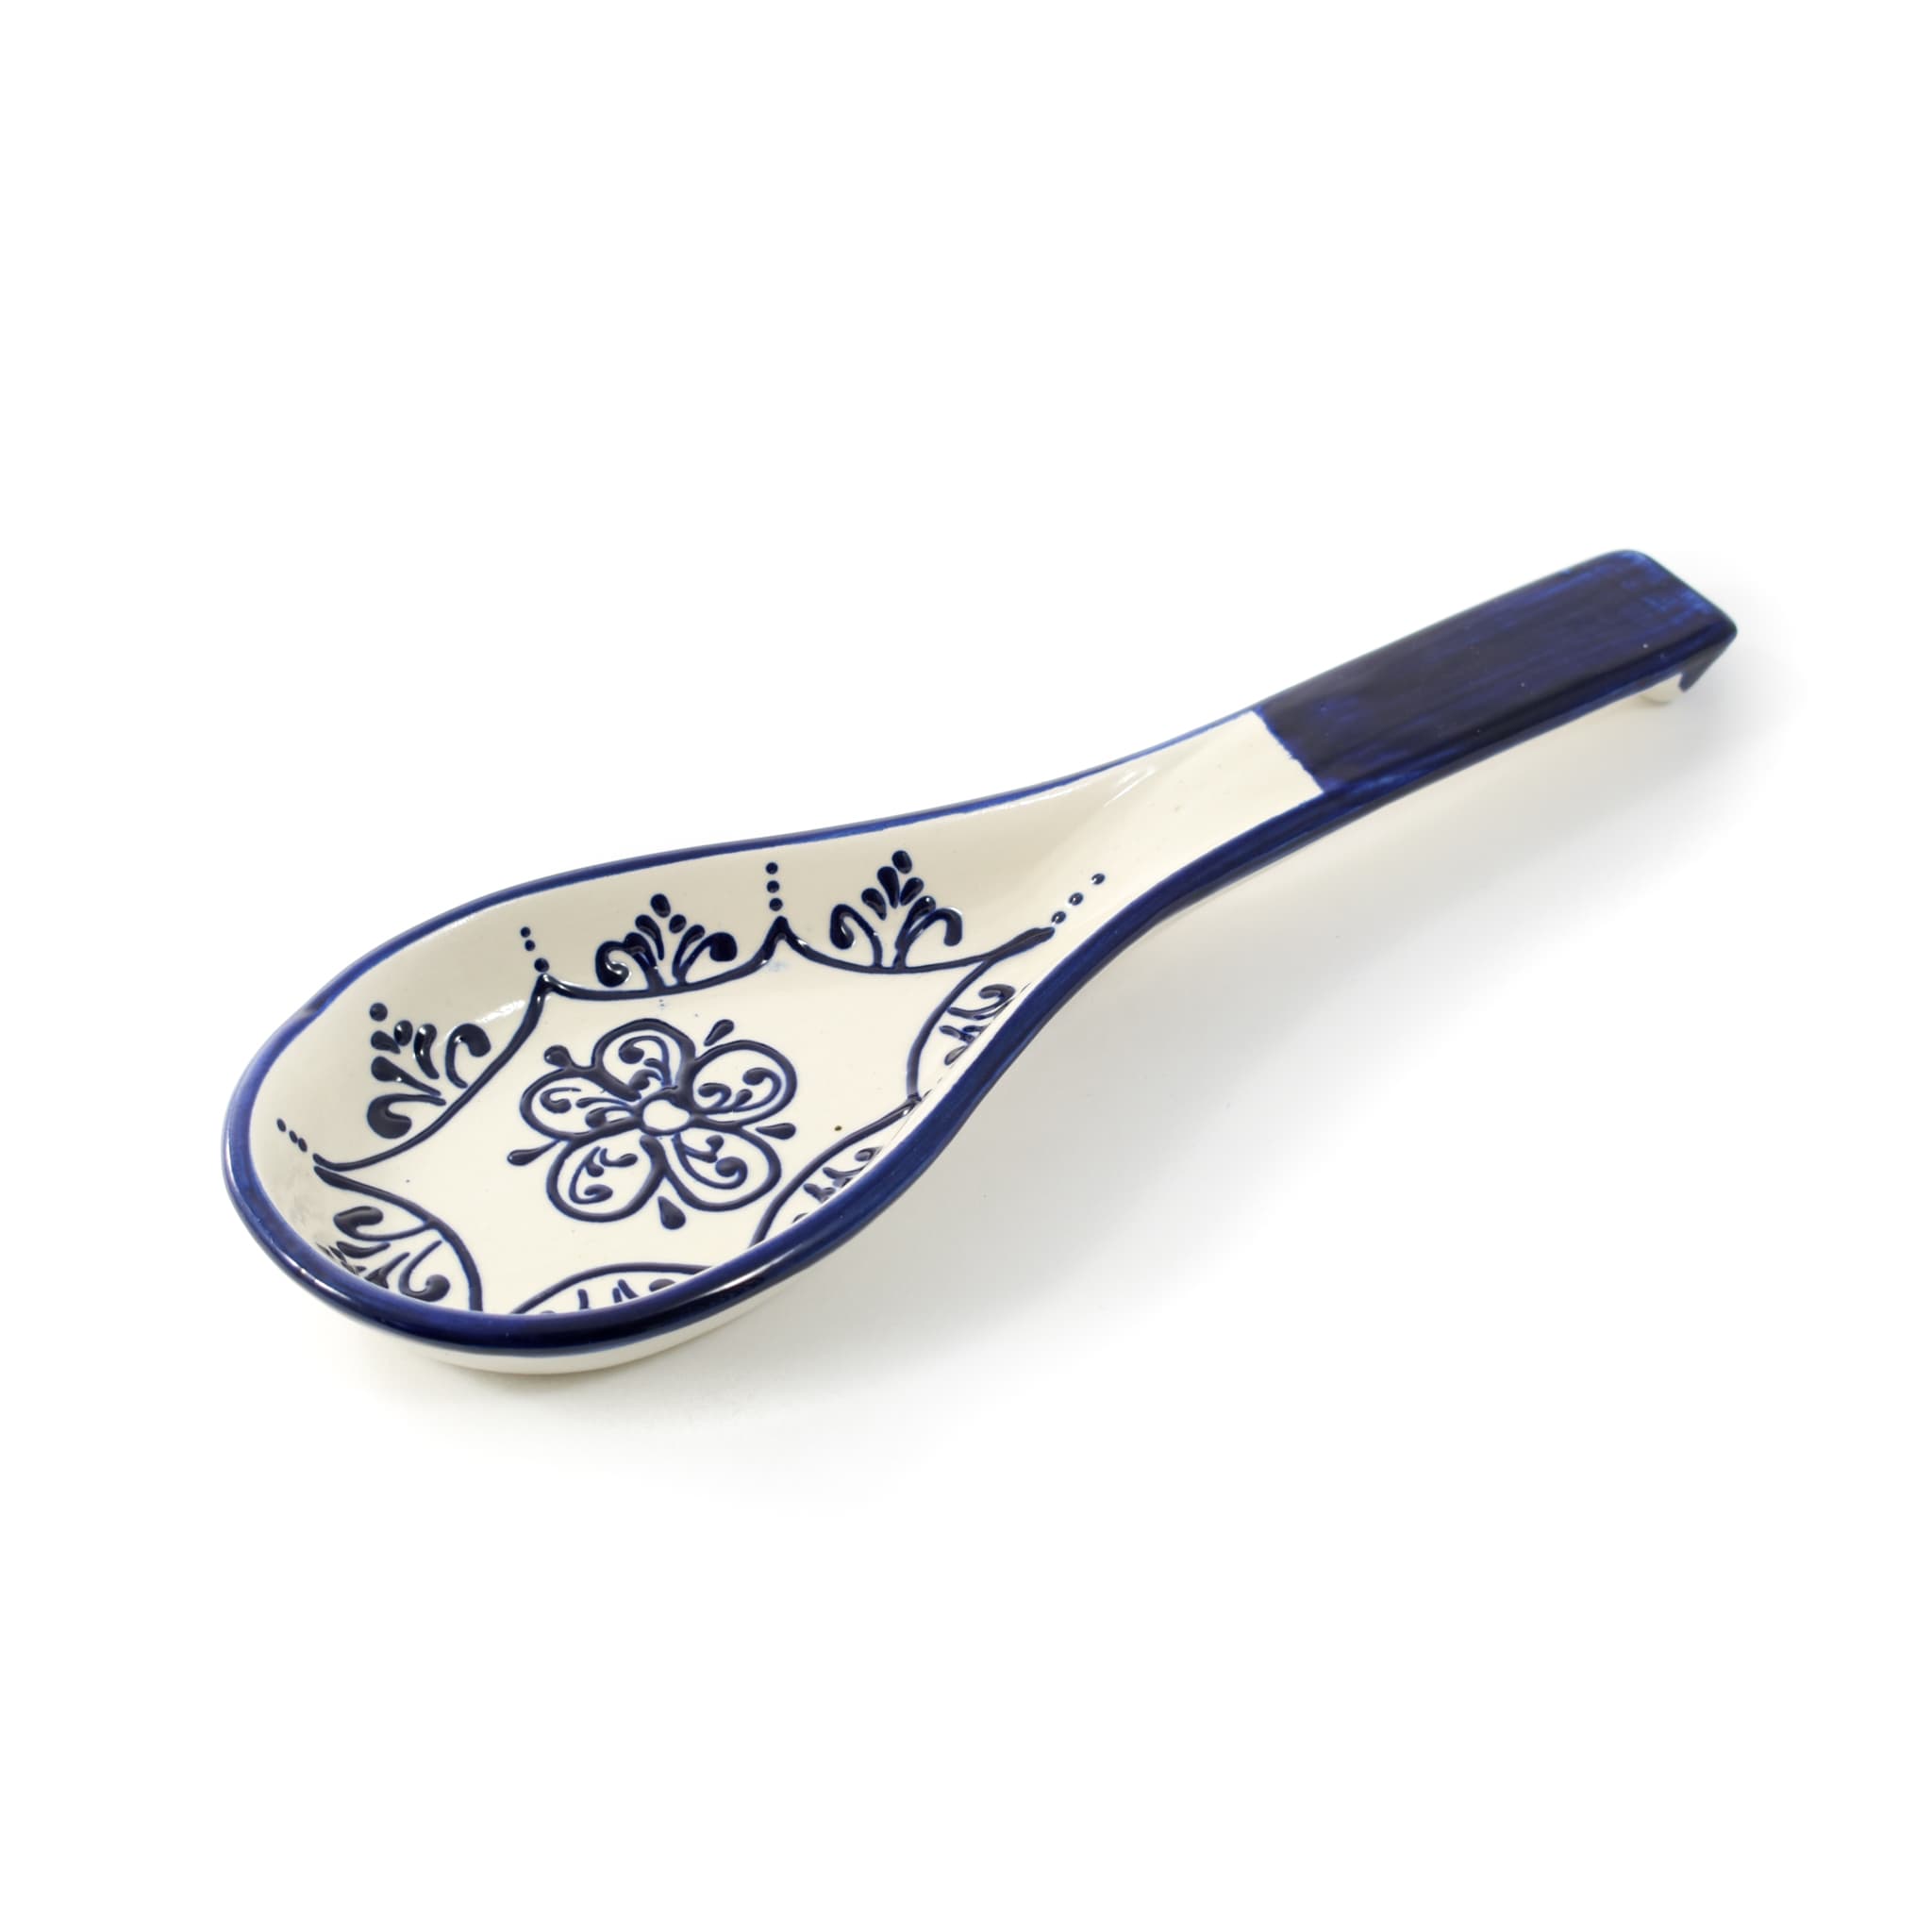 Sous Chef Andalucia Spoon Rest 25cm Painted Spanish Tableware